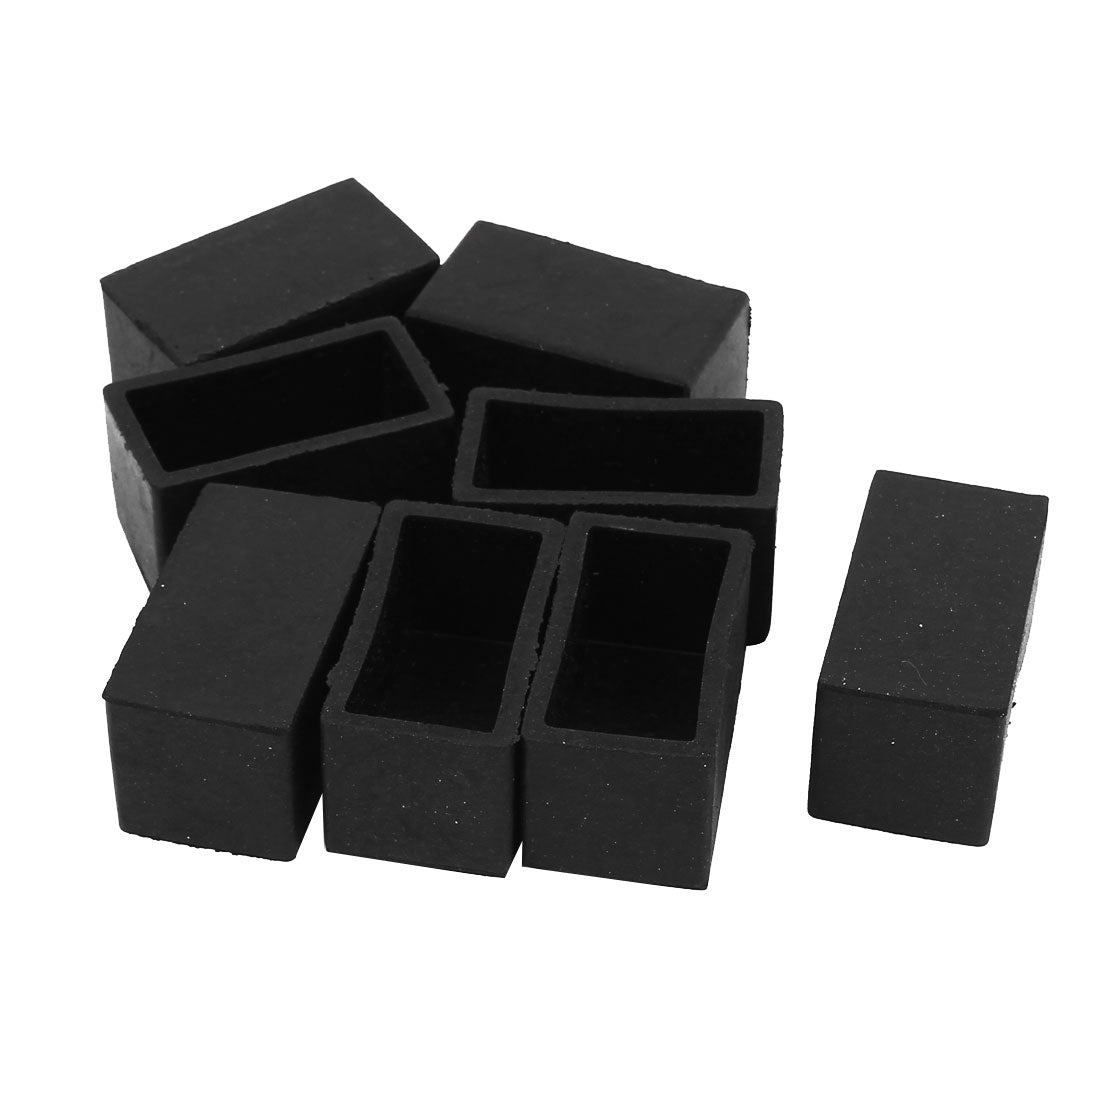 uxcell Uxcell Rectangle Shaped Furniture Table Chair Leg Foot Plastic Cover Cap Black 40mm x 20mm 8pcs